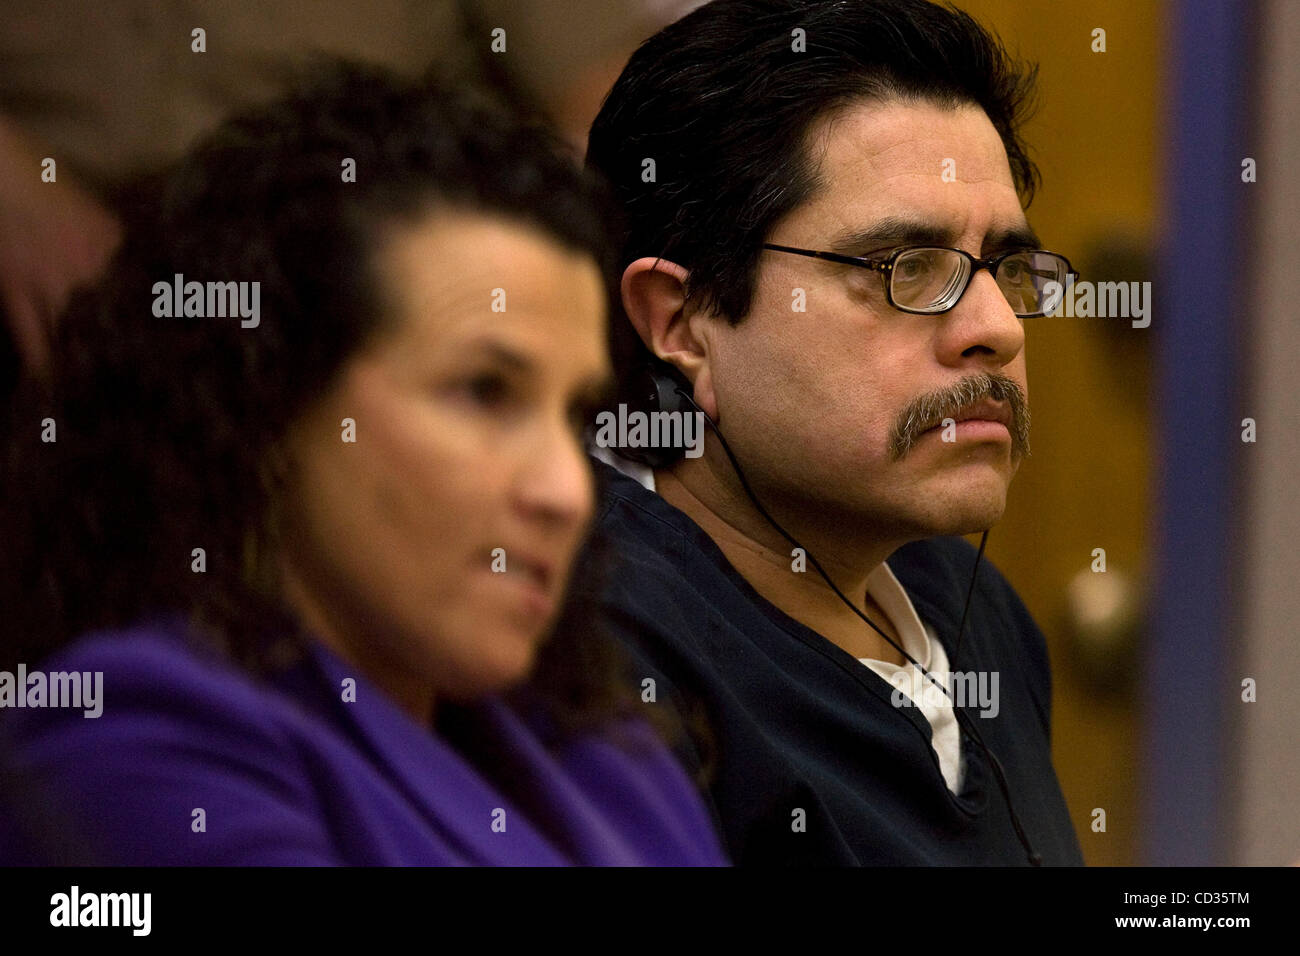 April 11, 2008 El Cajon California USA (LtoR) KIM VEGAS, attorney with the Public Defenders office of San Diego County and her client CELESTINO MENDEZ MARTINEZ listen to Judge Herbert J. Exarhos rule on the defense motion to dismiss murder charges against Celestino Mendez Martinez charged with 1988  Stock Photo